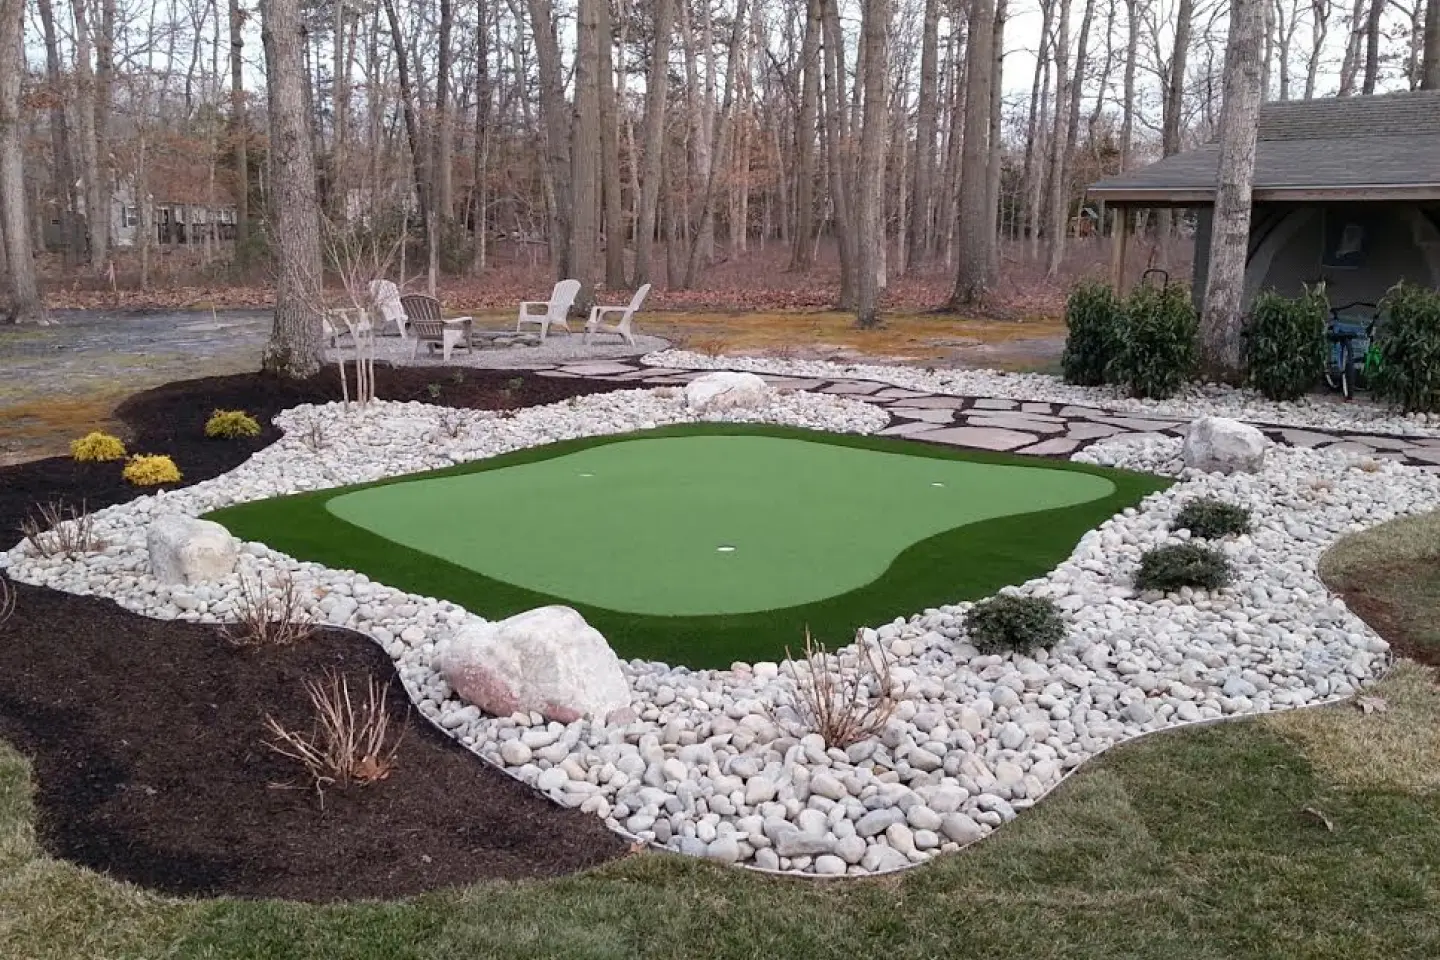 A backyard with a putting green and rocks.